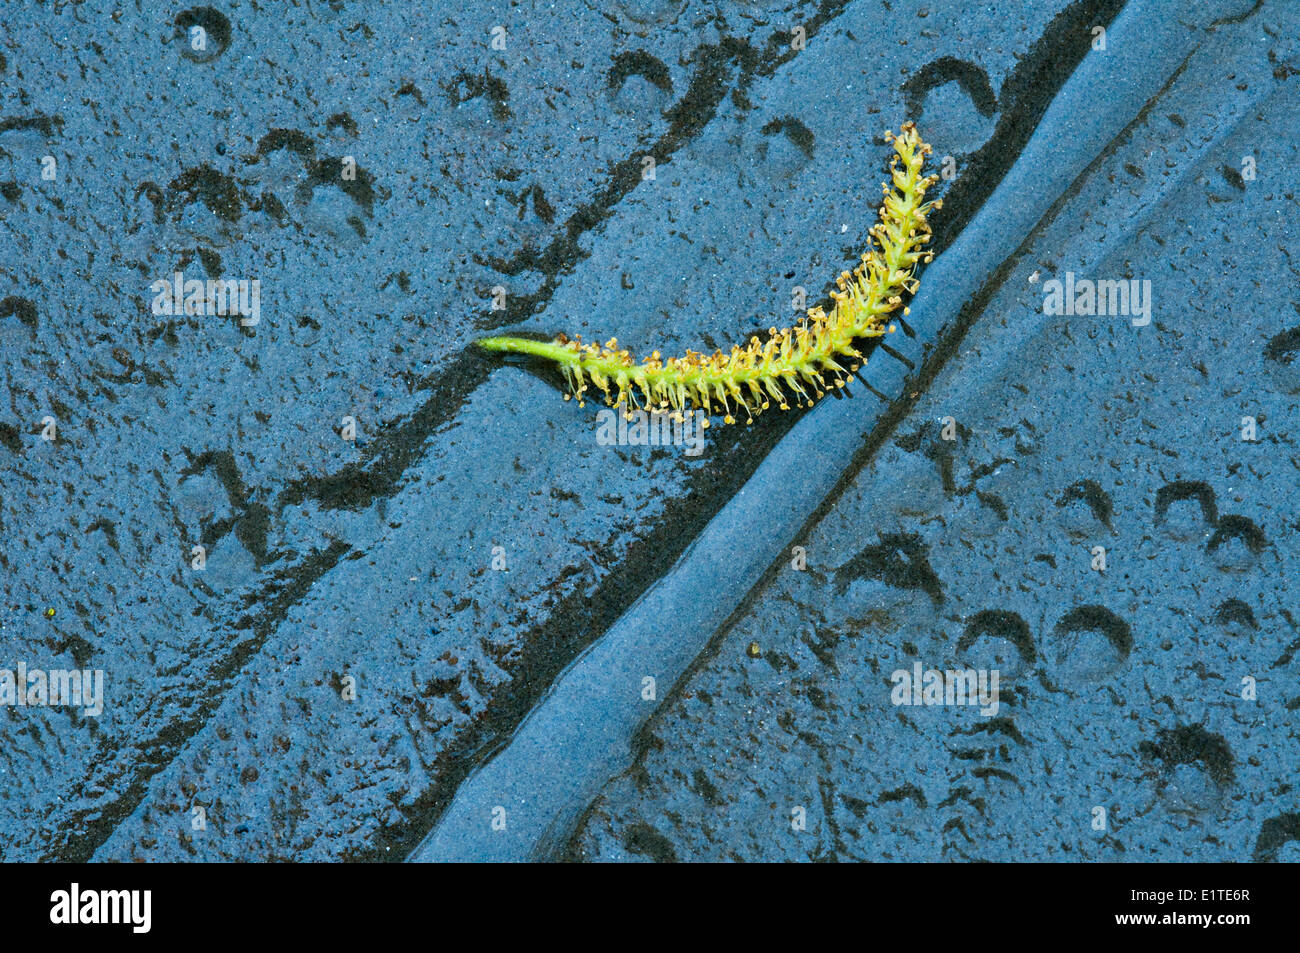 willow catkin on a tidal mudflat in the Dutch delta Stock Photo